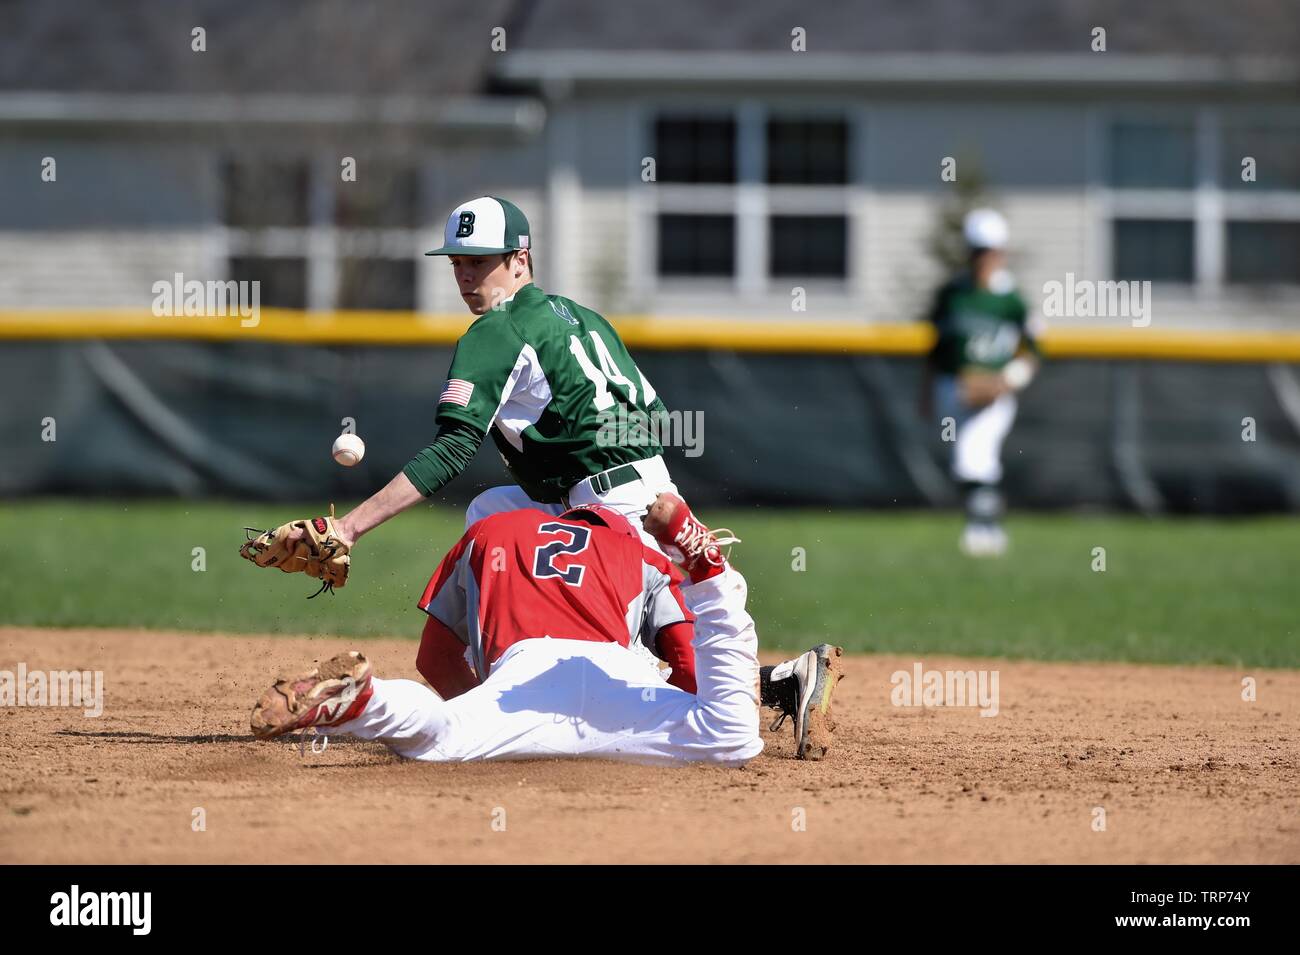 With head-first slide, runner successfully stole second base as the opposing second baseman was unable to secure the throw from the catcher. USA. Stock Photo